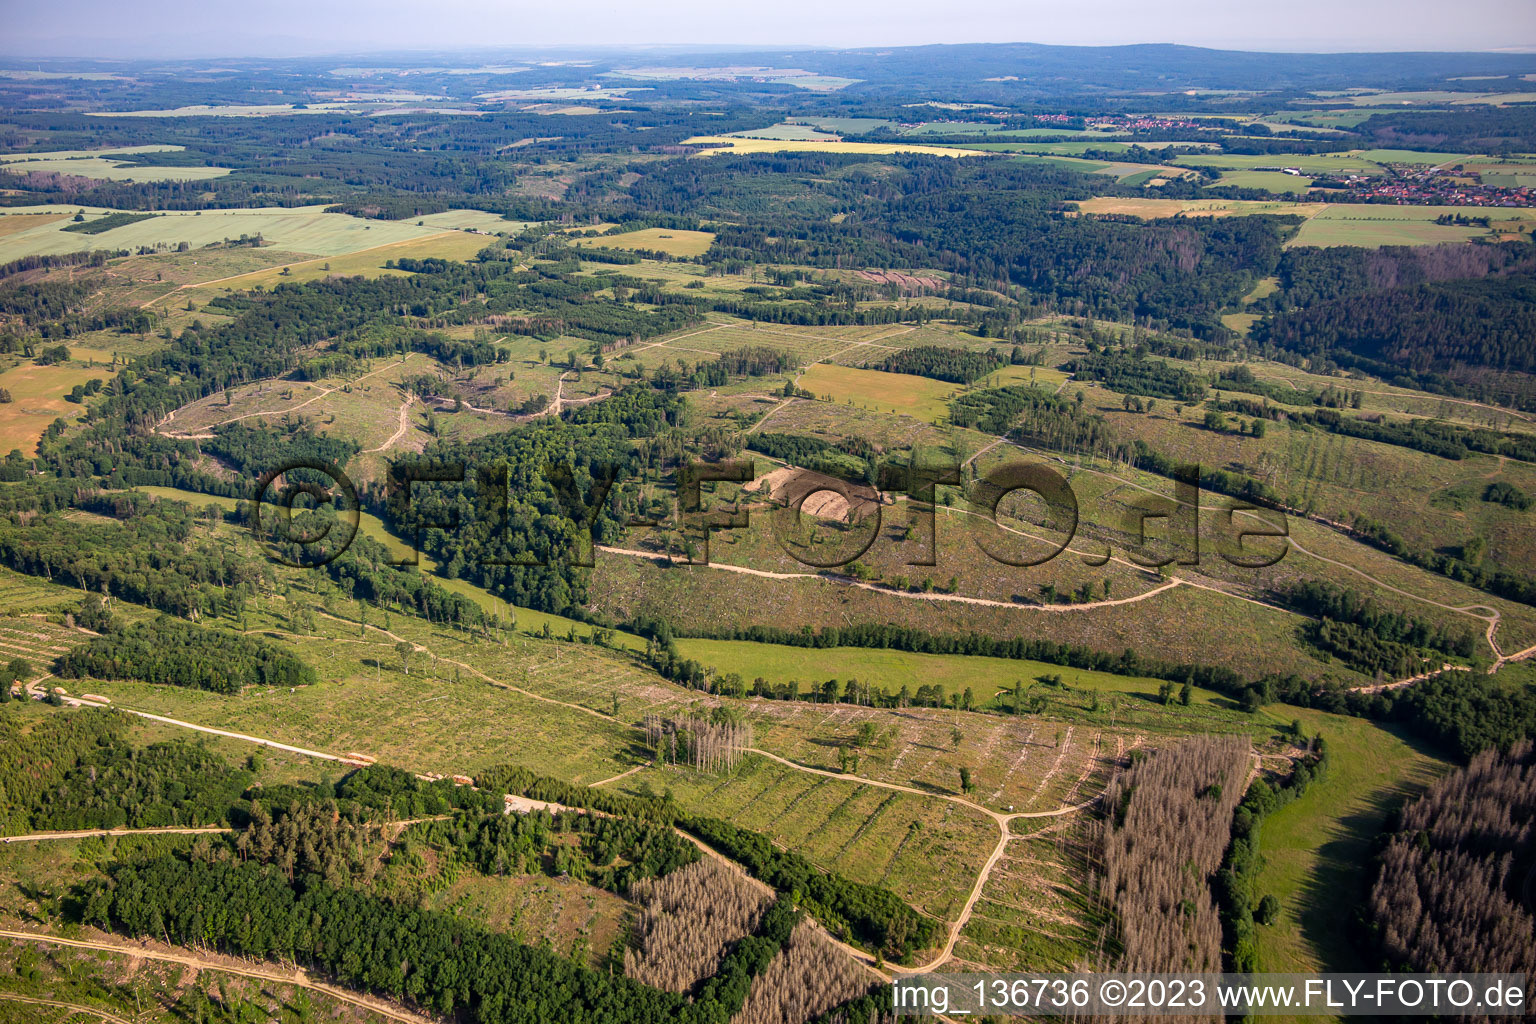 Remains of the bark beetle forest and reforestation in the district Dankerode in Harzgerode in the state Saxony-Anhalt, Germany